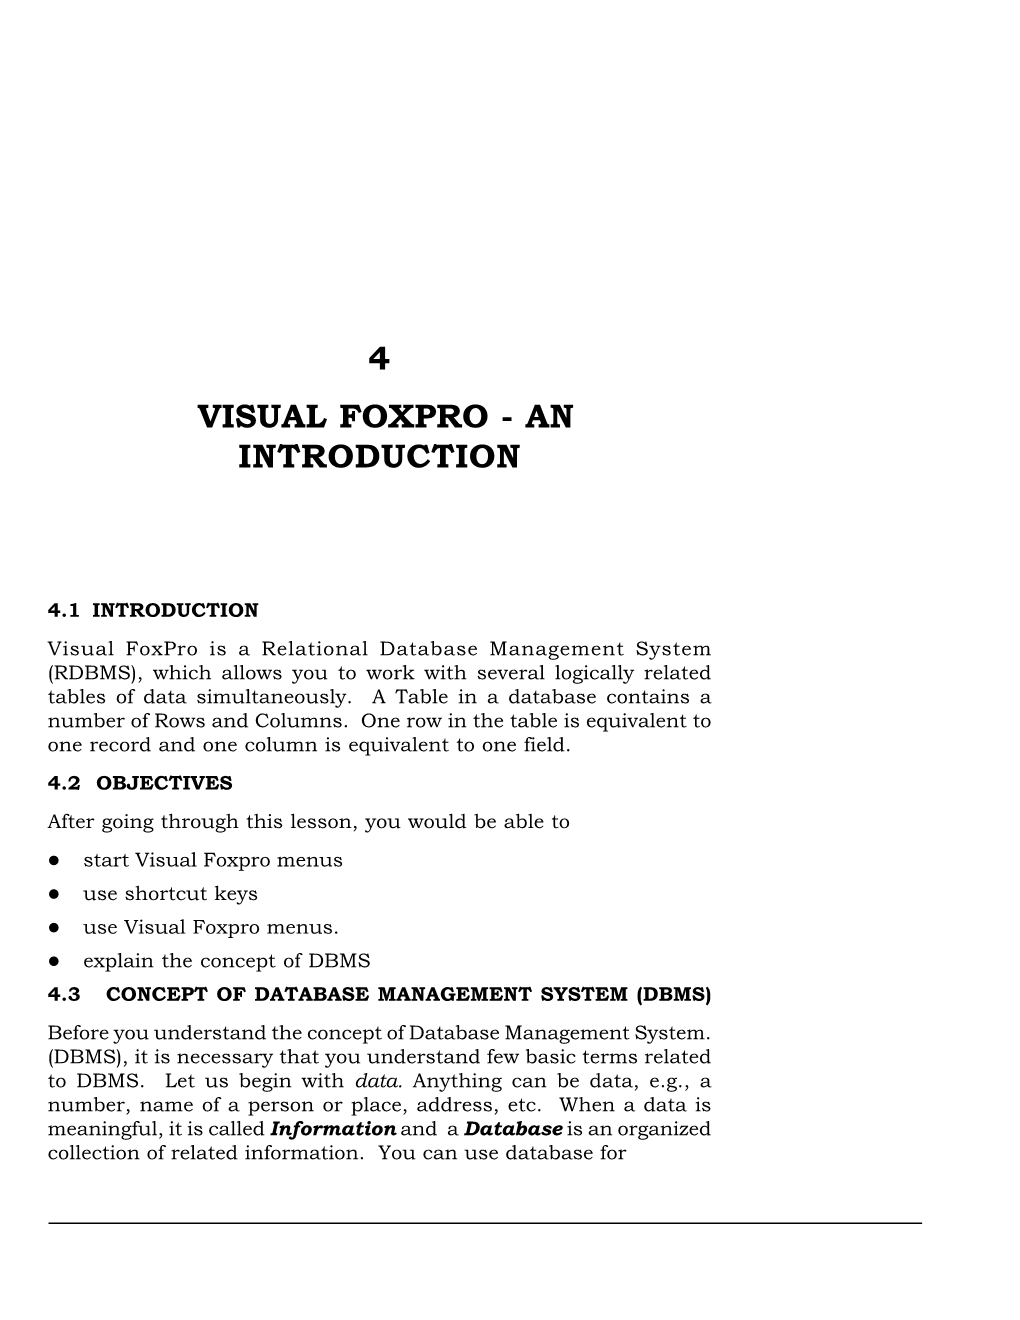 4 Visual Foxpro - an Introduction